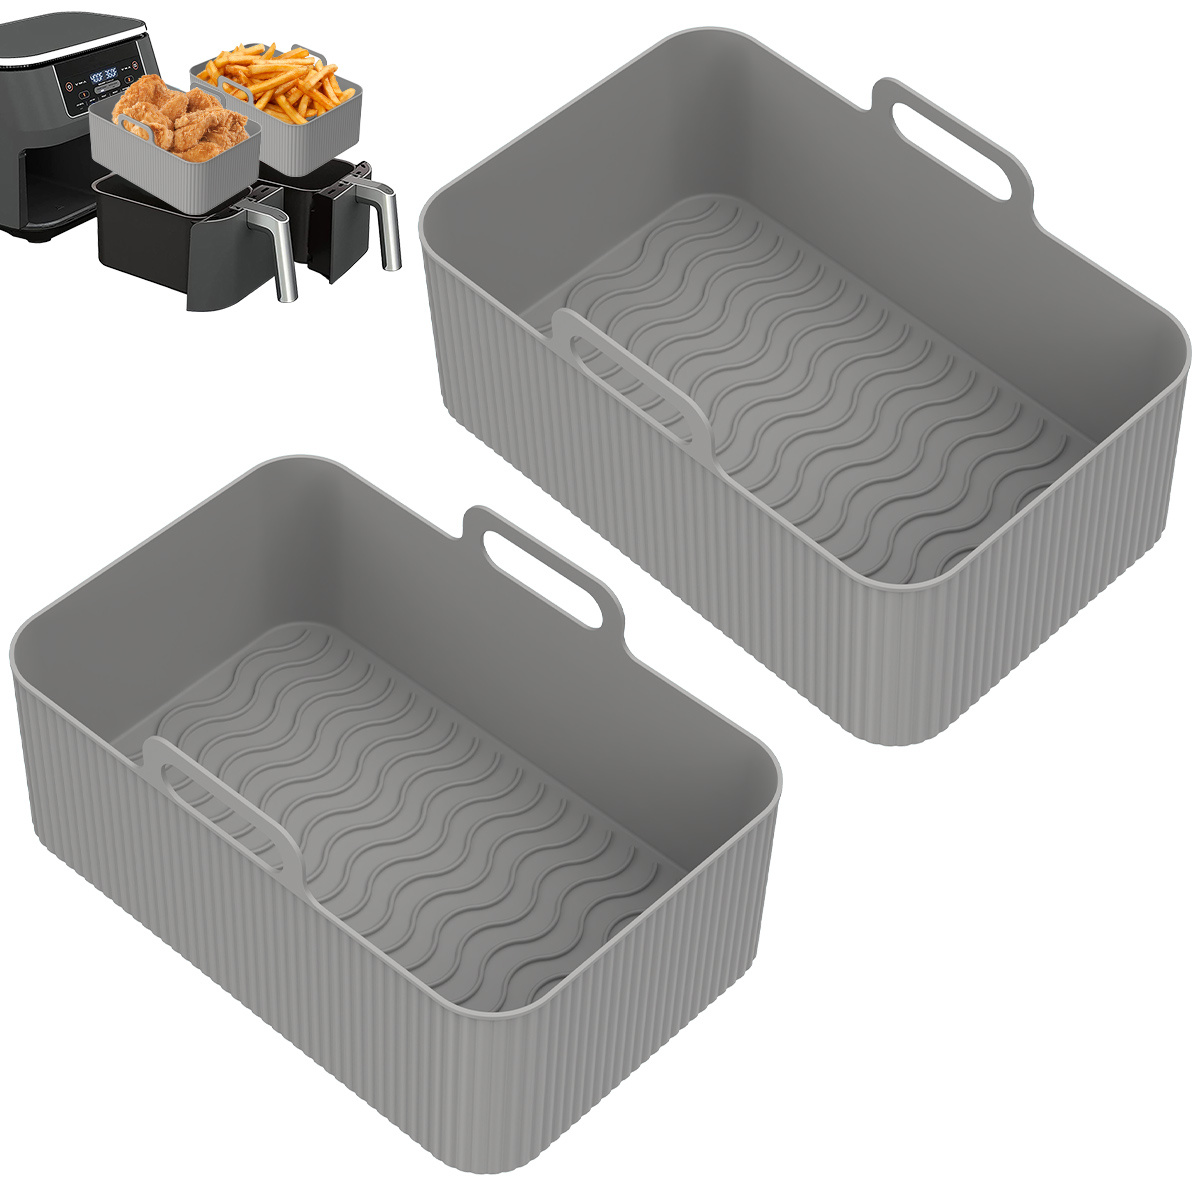 2x Silicone Pot for Air Fryer Dual Basket Liner Handle Baking Pan